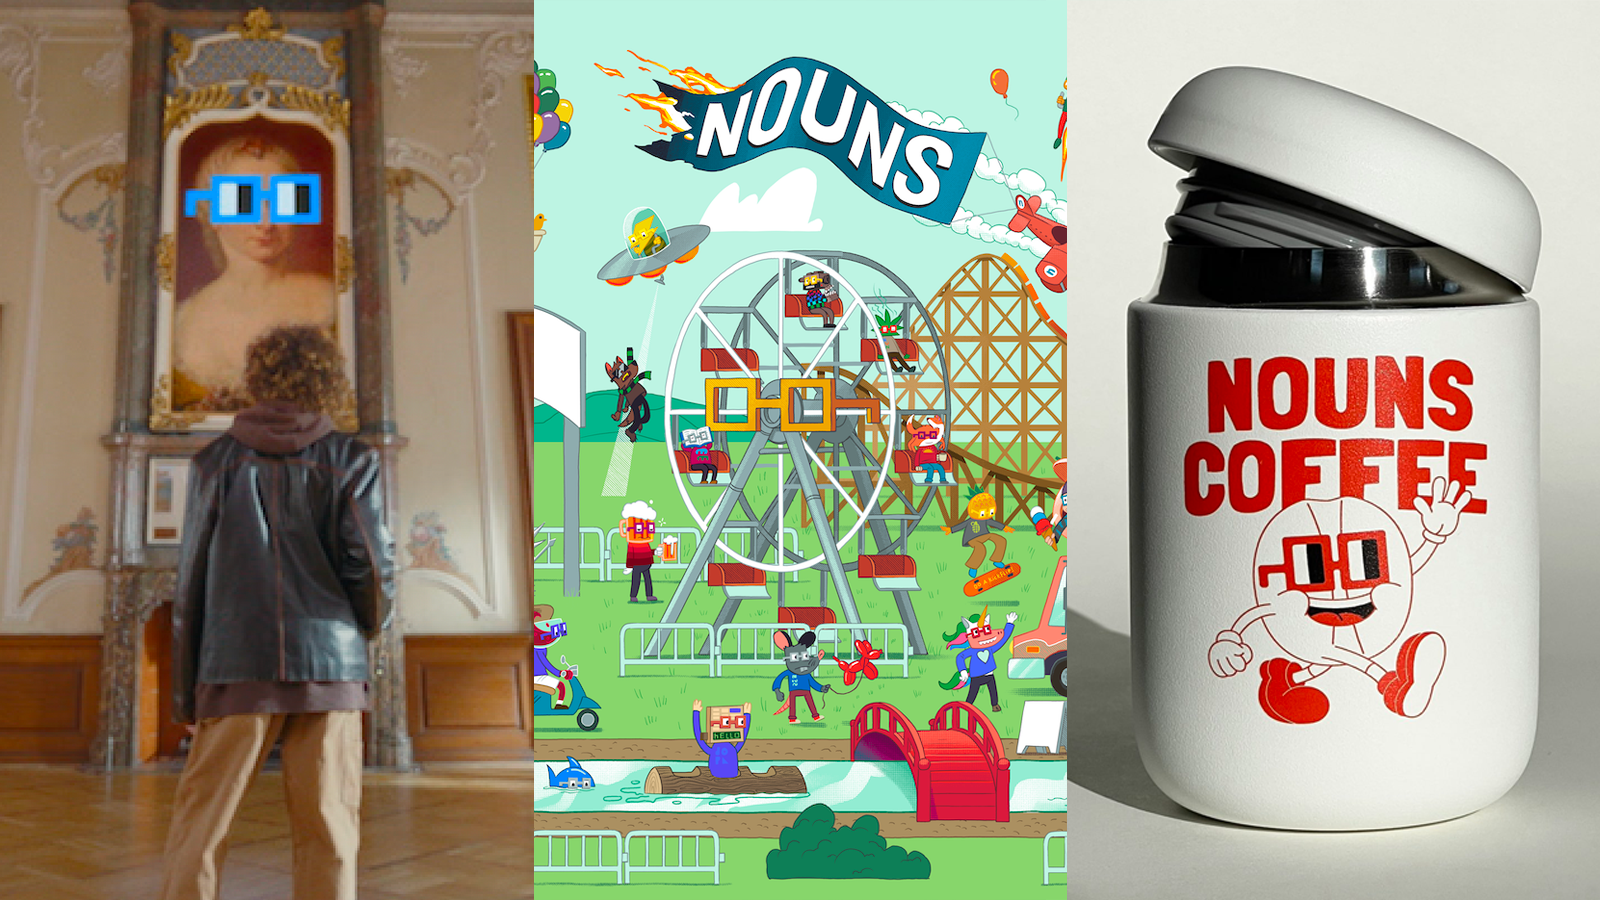 Nouns SuperBowl Ad, Nouns Around Town, and Nouns Coffee (from left to right)